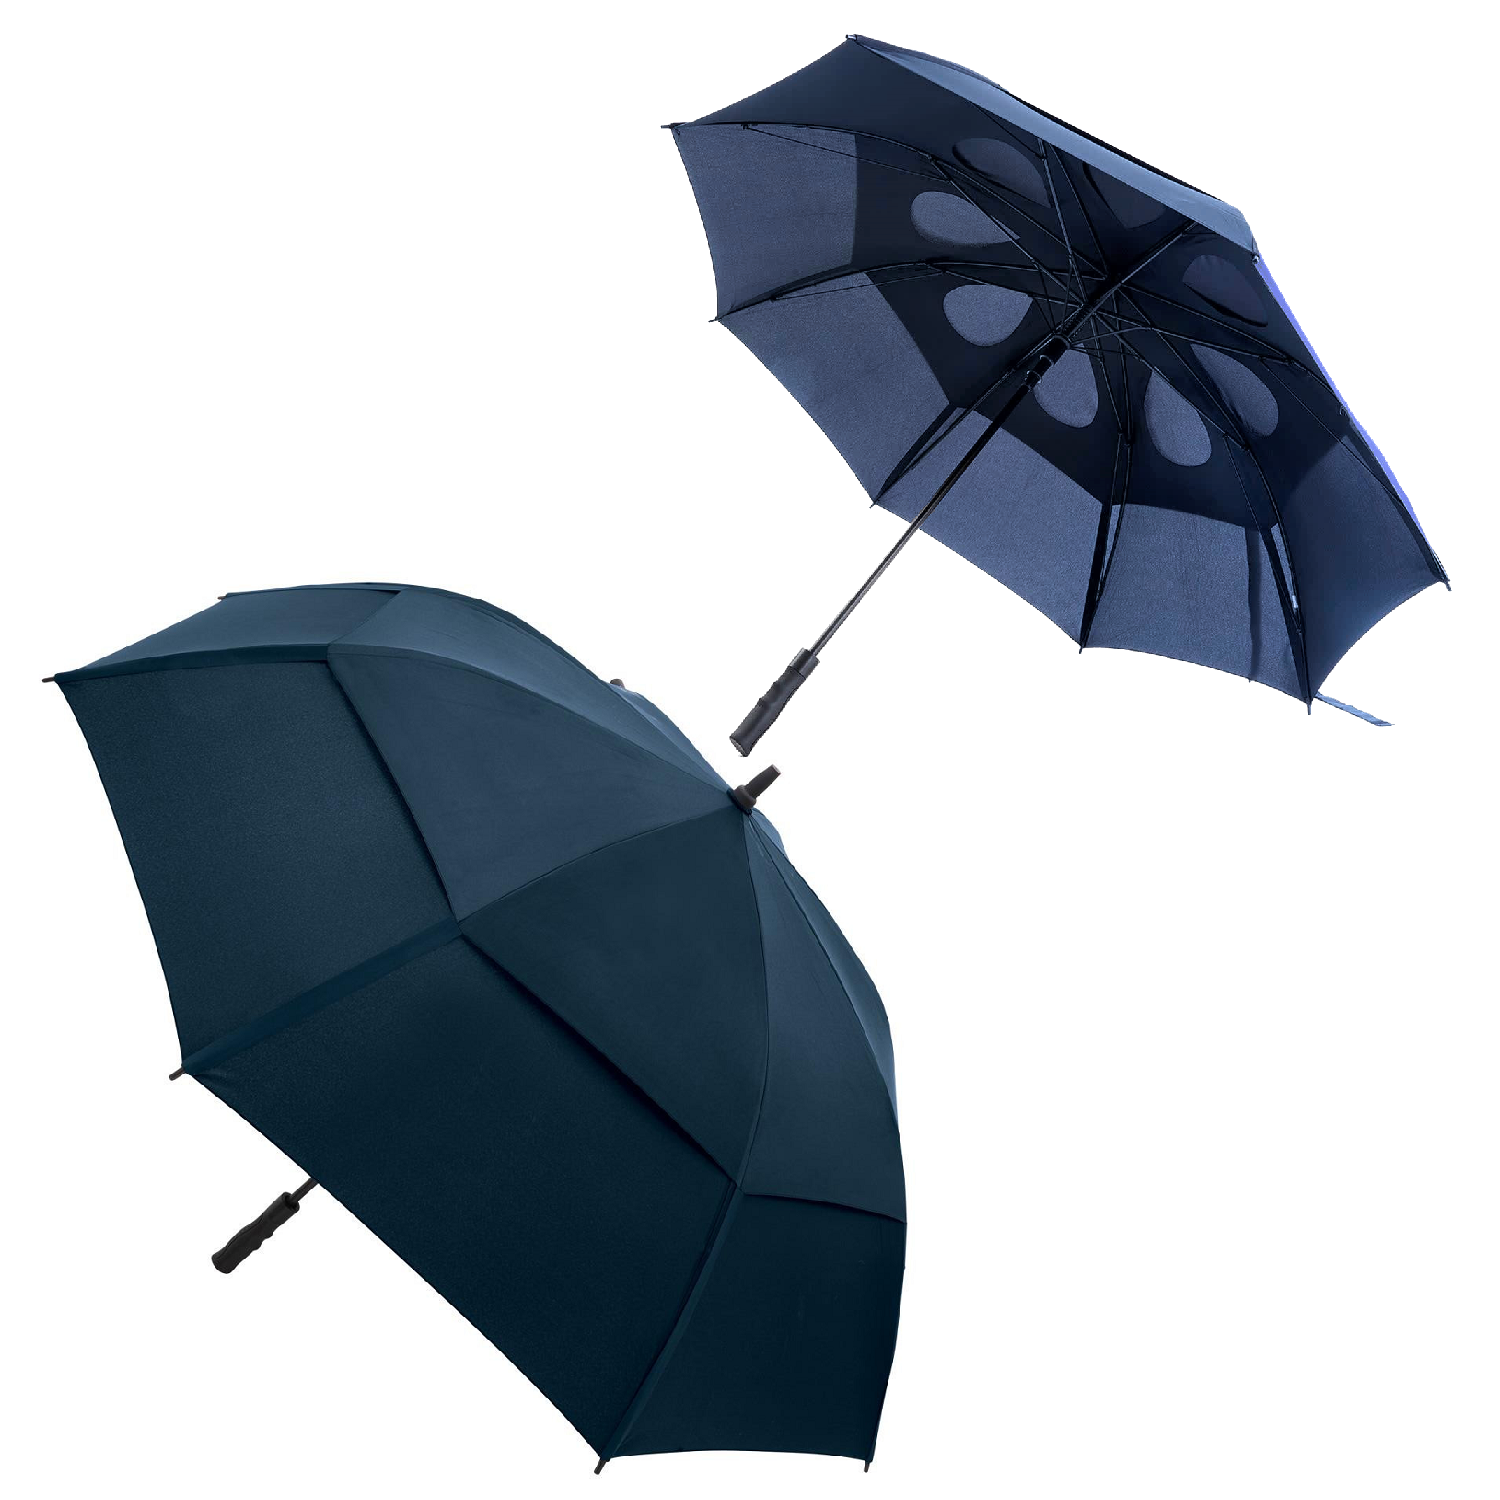 UMBRA®️ ULTIMATE Heavy Duty Umbrella With Superior ULTIMATE™ Fibreglass Frame, Double Layer Wind Vent System - Auto-Open Push Button Feature